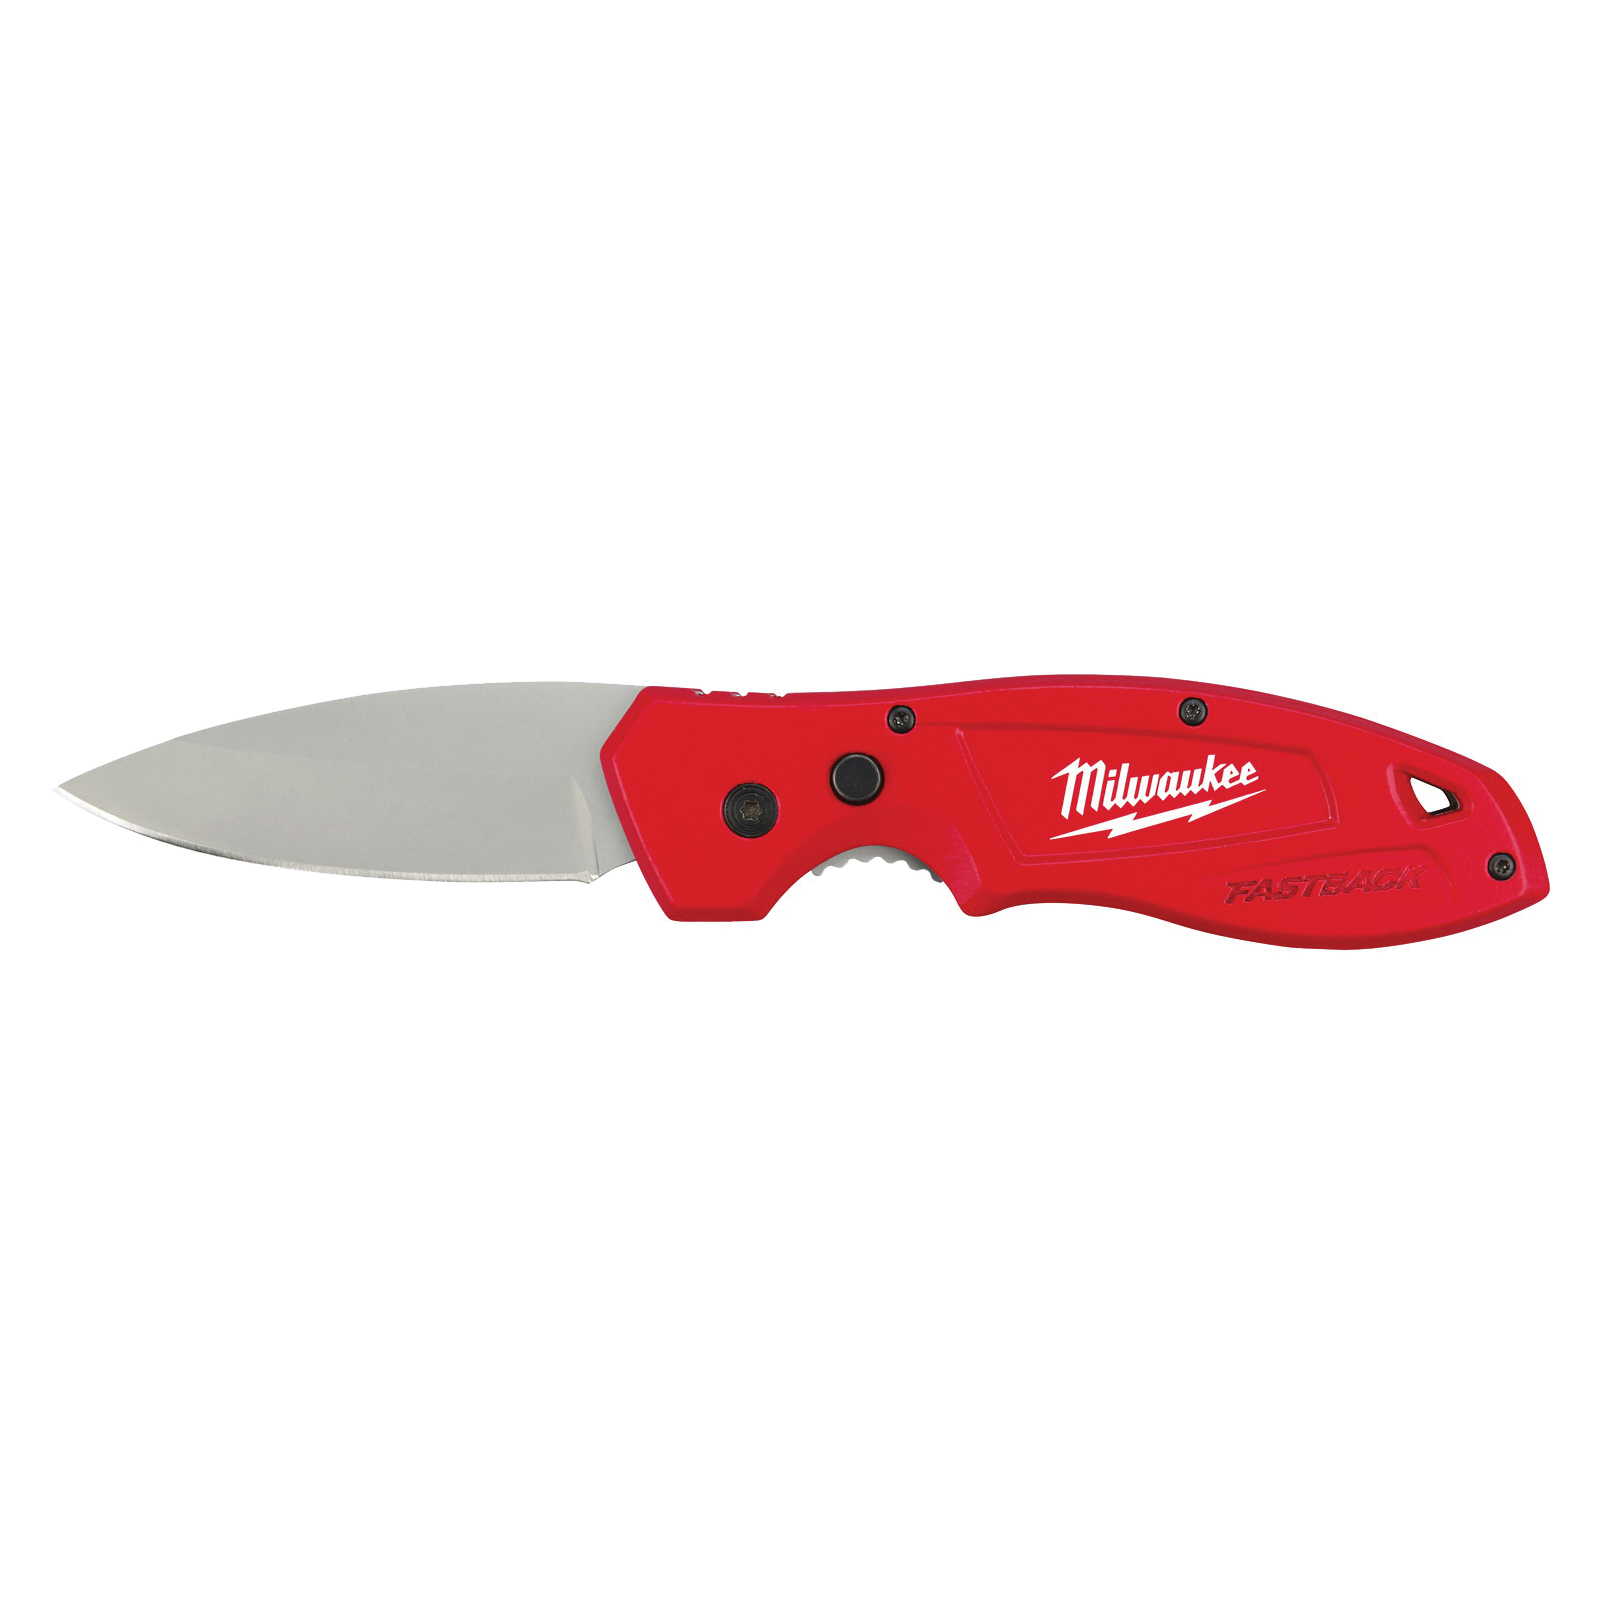 FASTBACK Series 48-22-1520 Pocket Knife, 5 in L Blade, Stainless Steel Blade, 1-Blade, Contour-Grip Handle